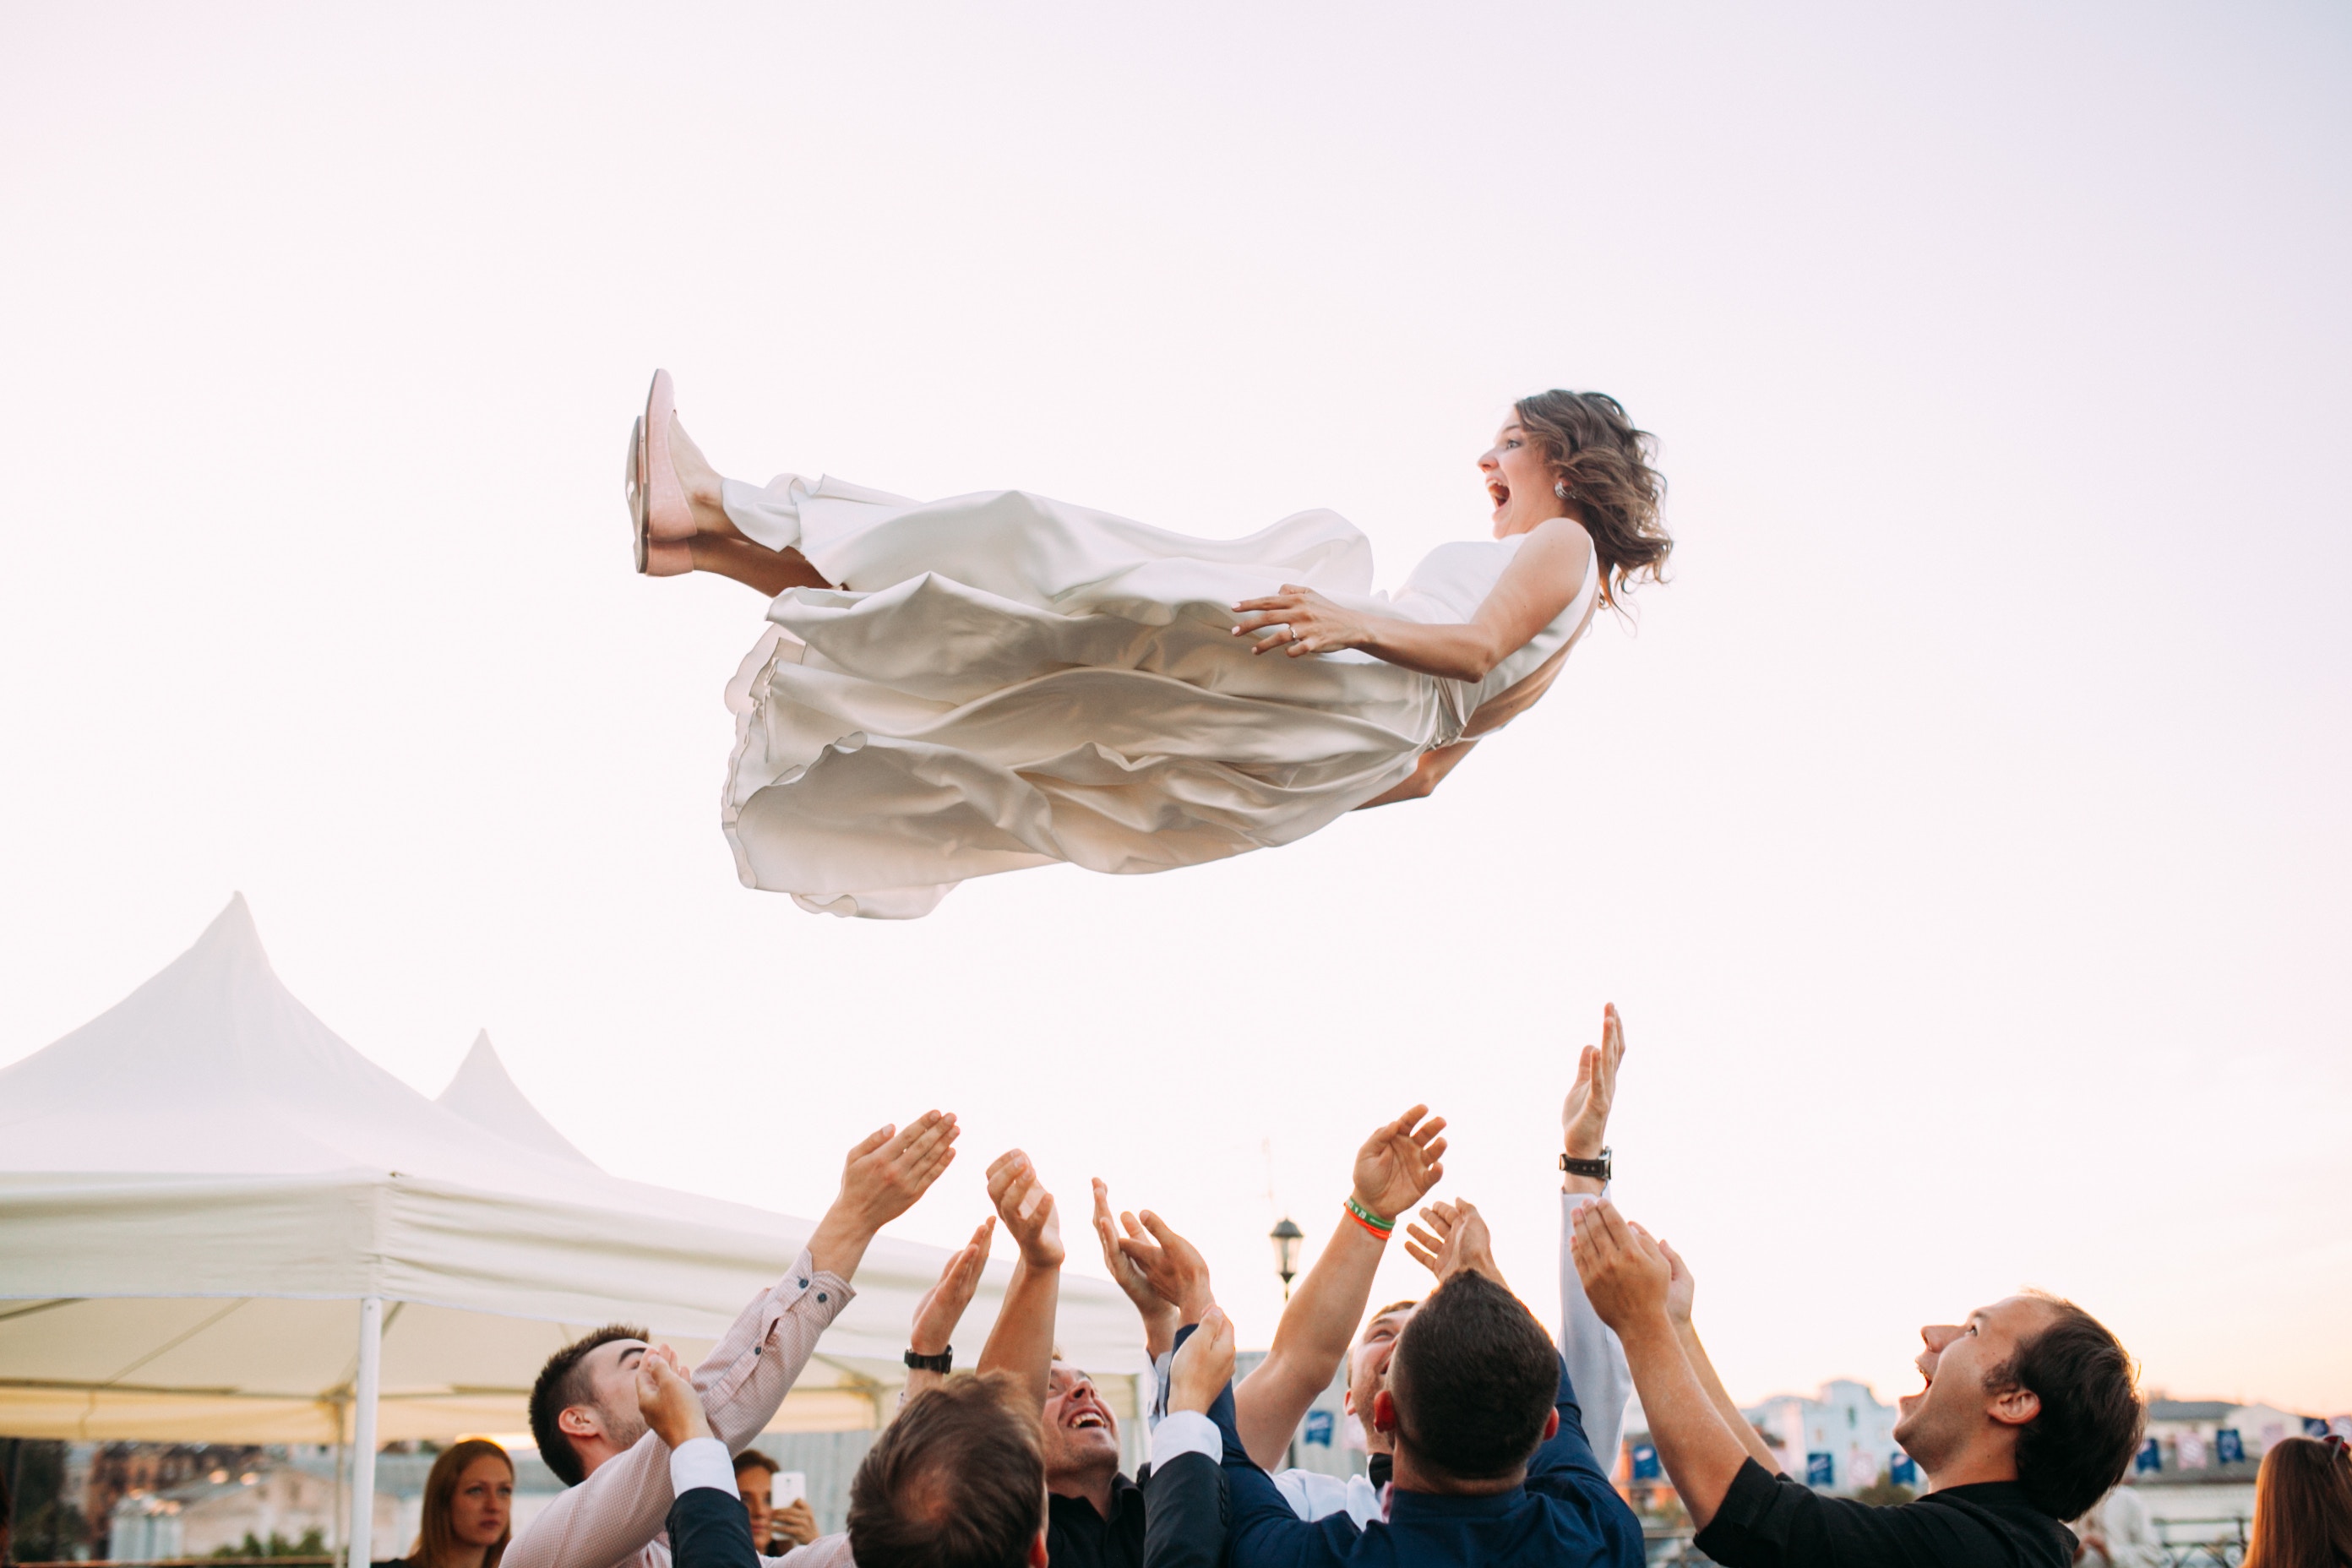 New wife thrown in the air as part of the wedding celebration. Brooklyn Dance Lessons bridesmaids package.